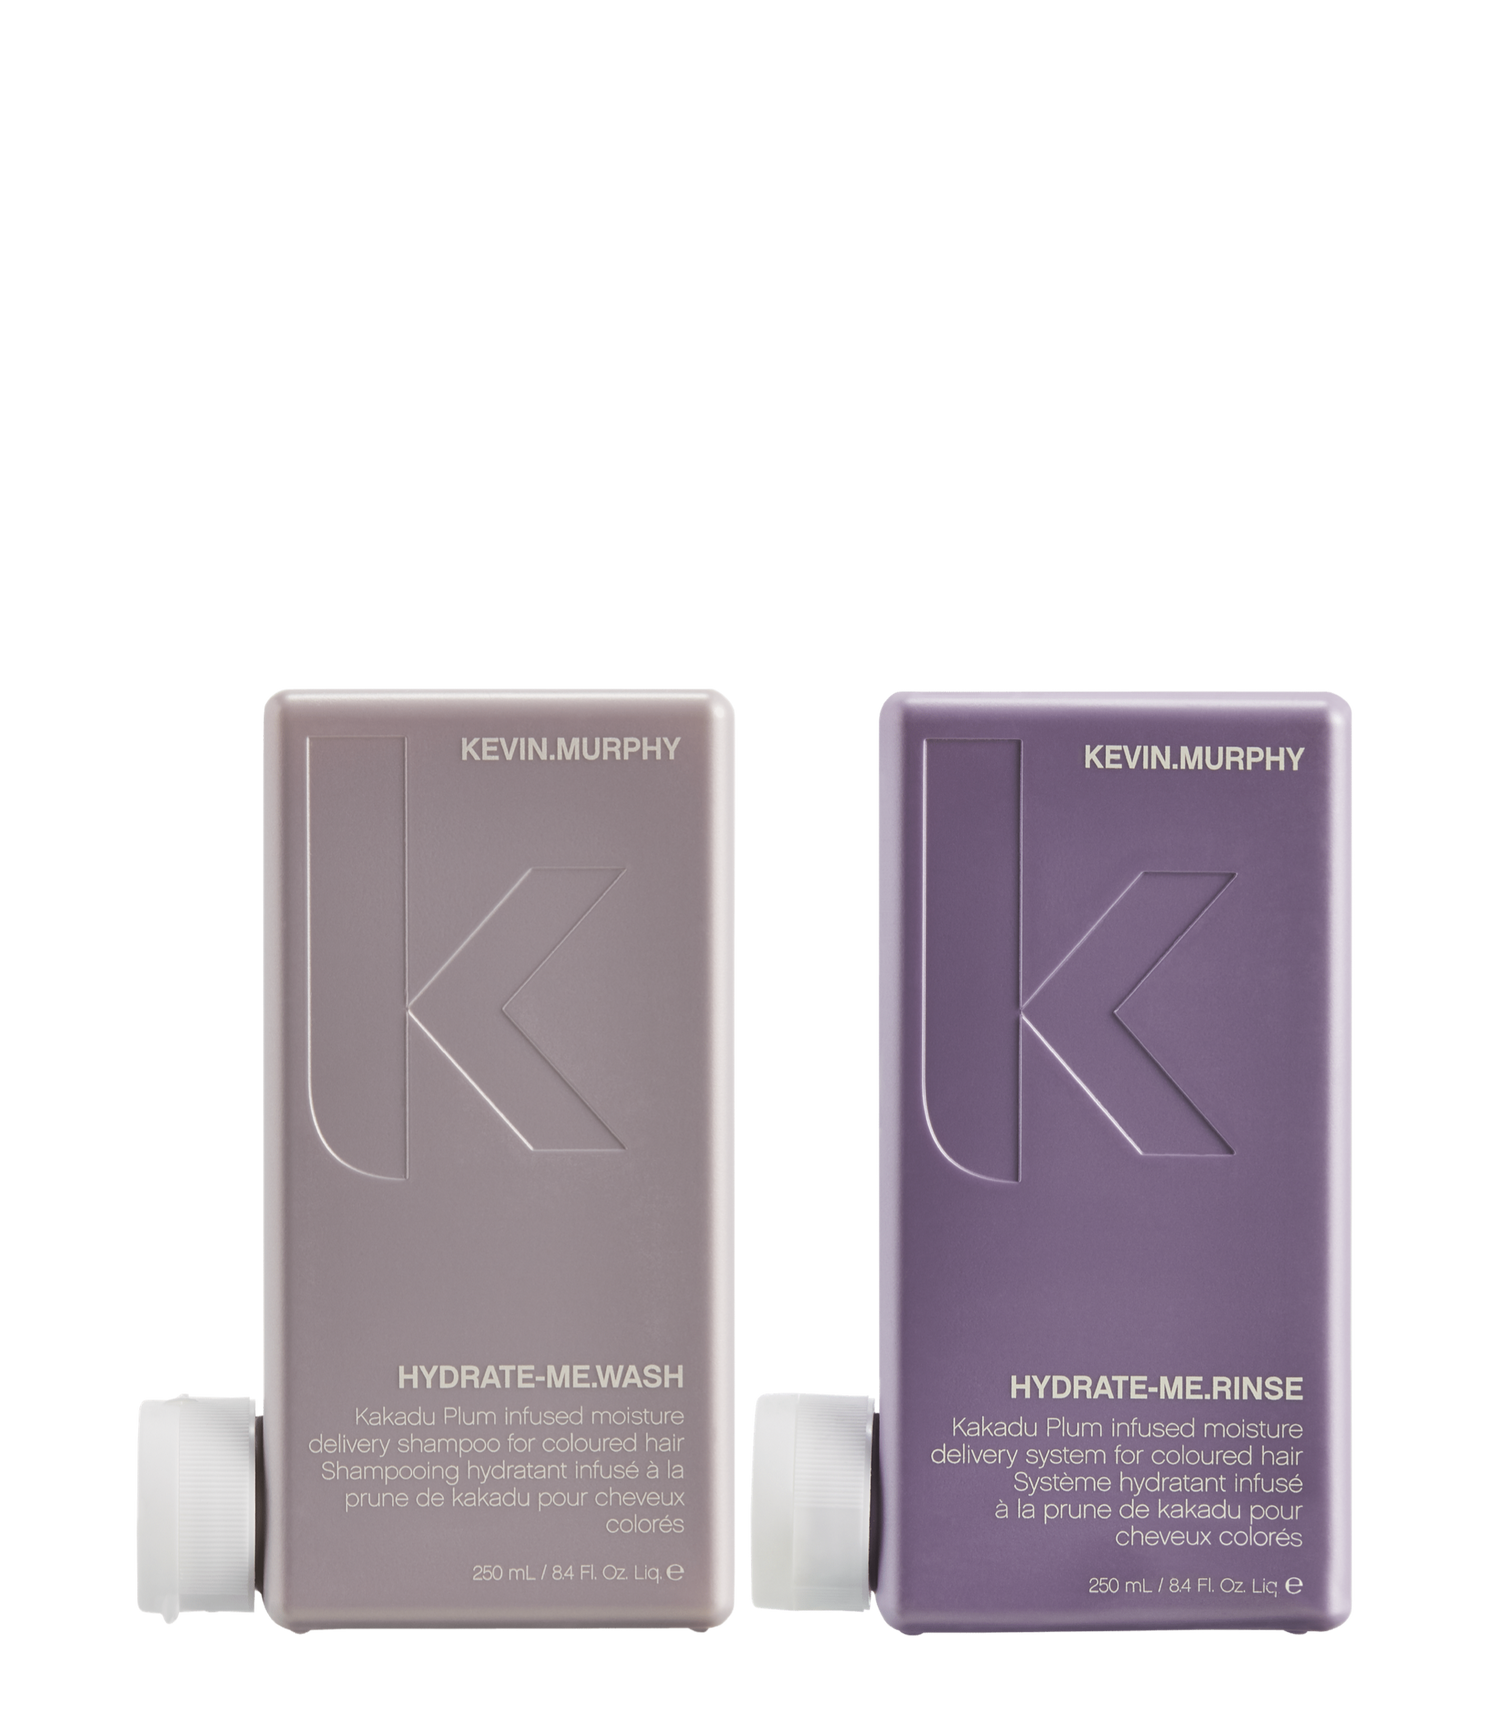 GAMME HYDRATE KEVIN MURPHY